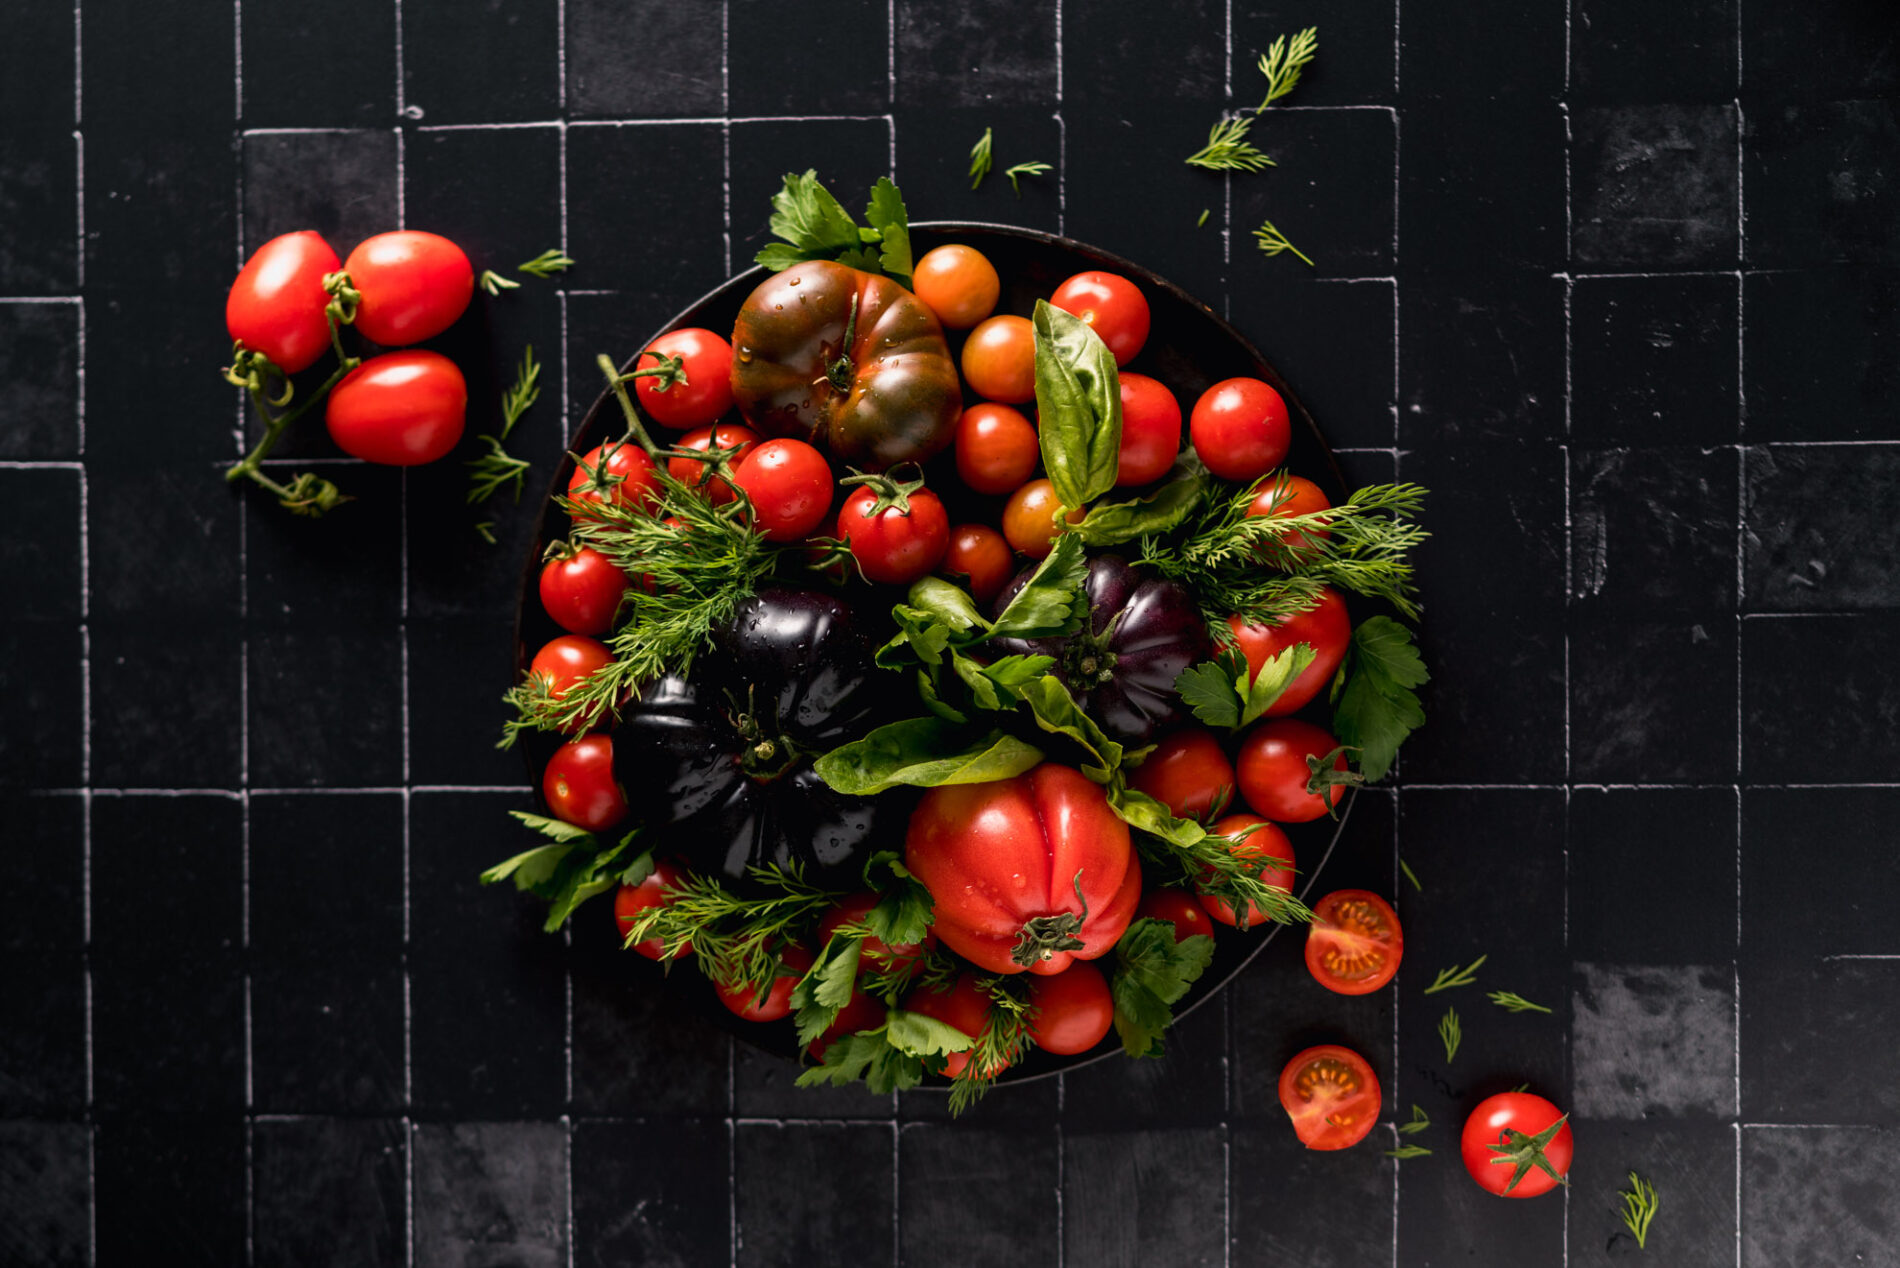 Different red tomatoes arranged on a black tiled floor